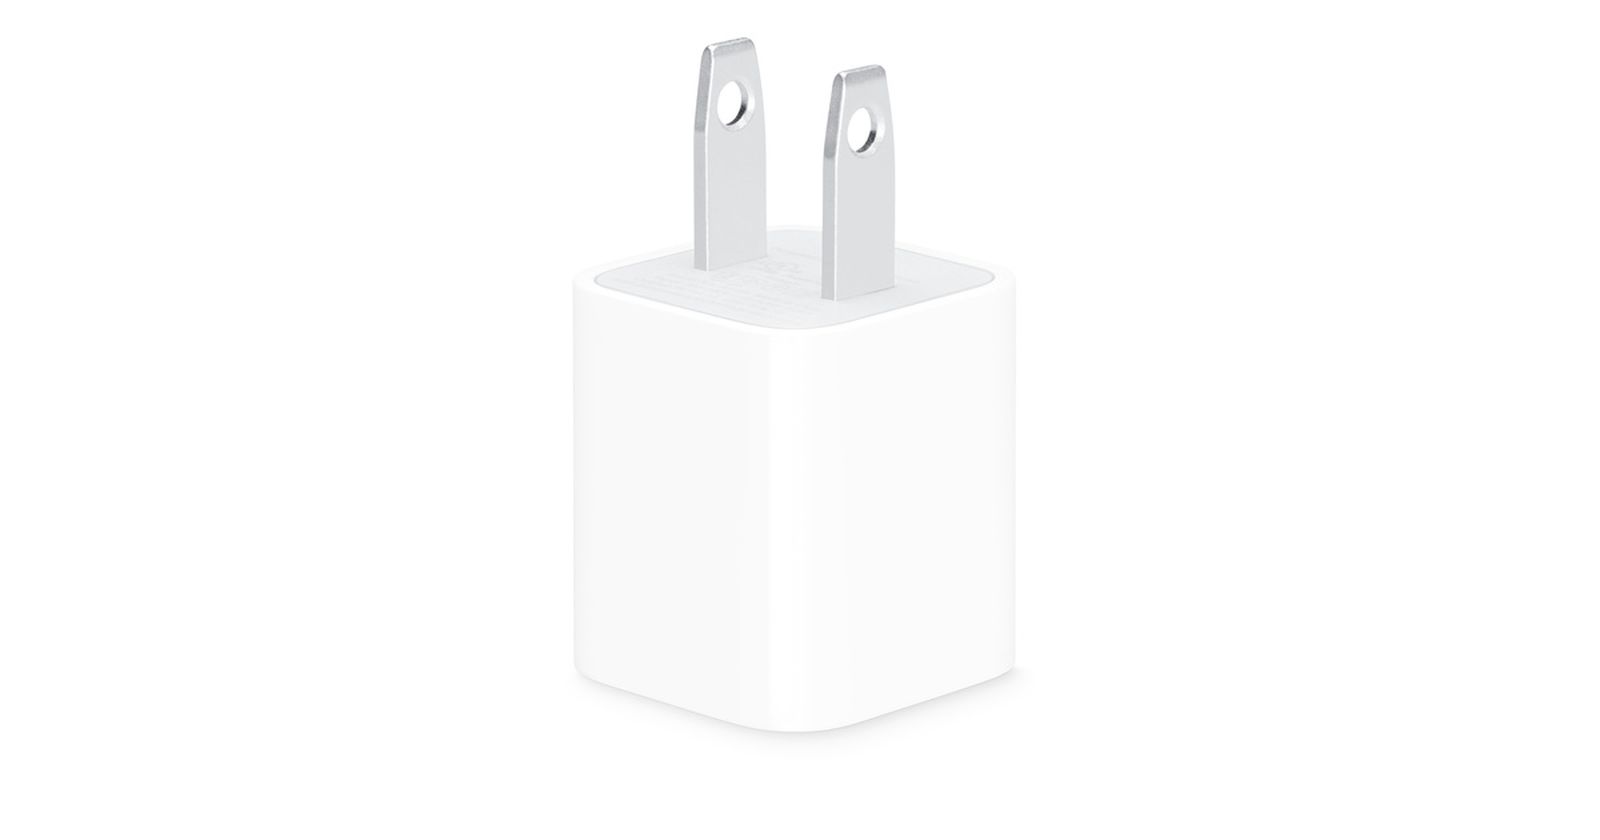 Apple's Slowest iPhone Charger No Longer Available in Some Countries